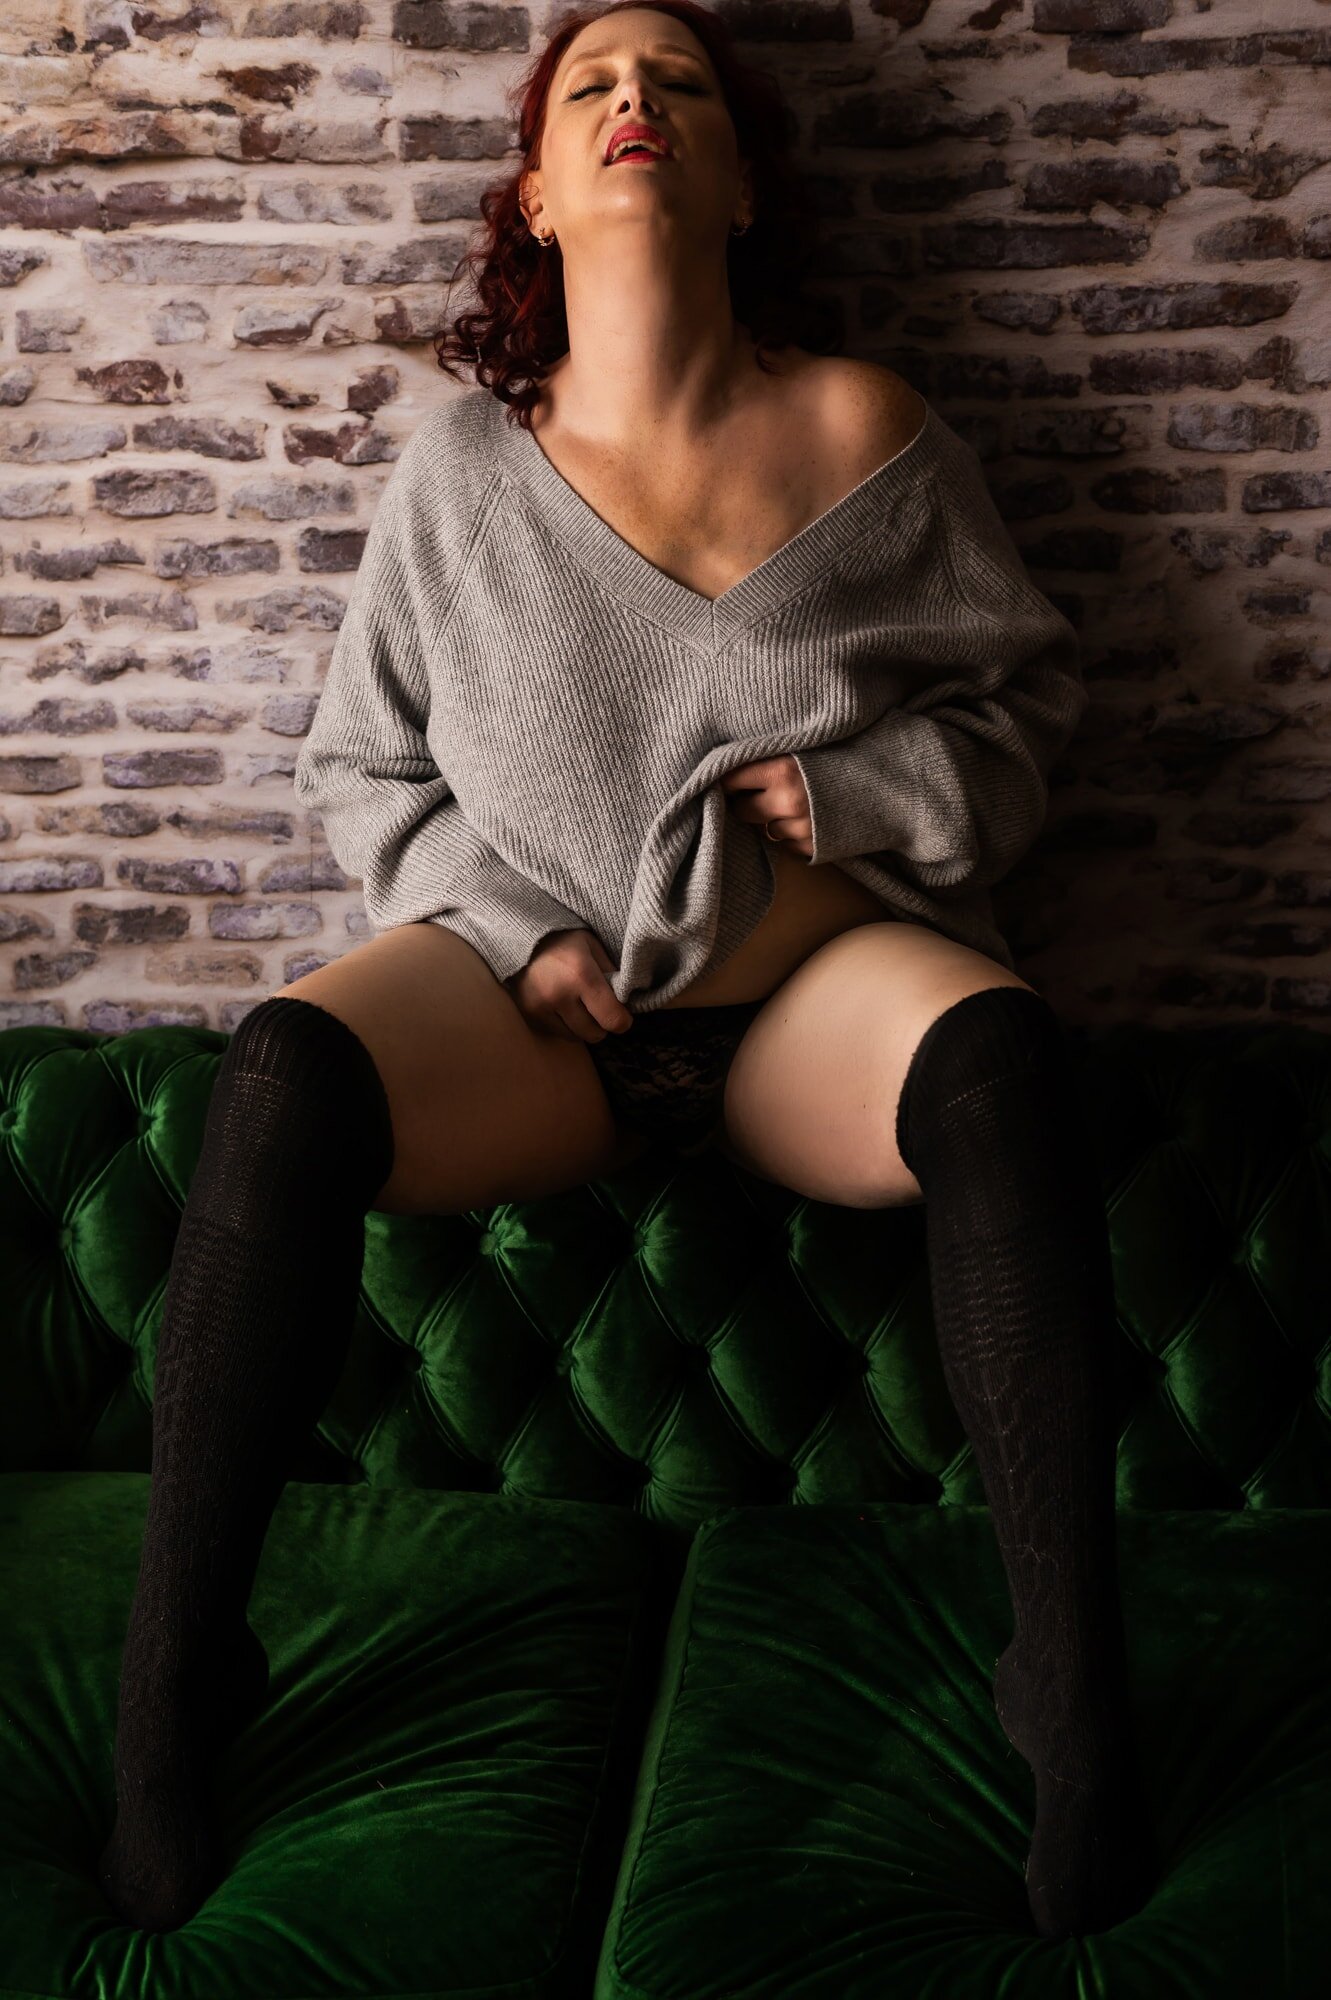 A woman poses in knee high socks and a sweater at a boudoir studio in rochester new york.